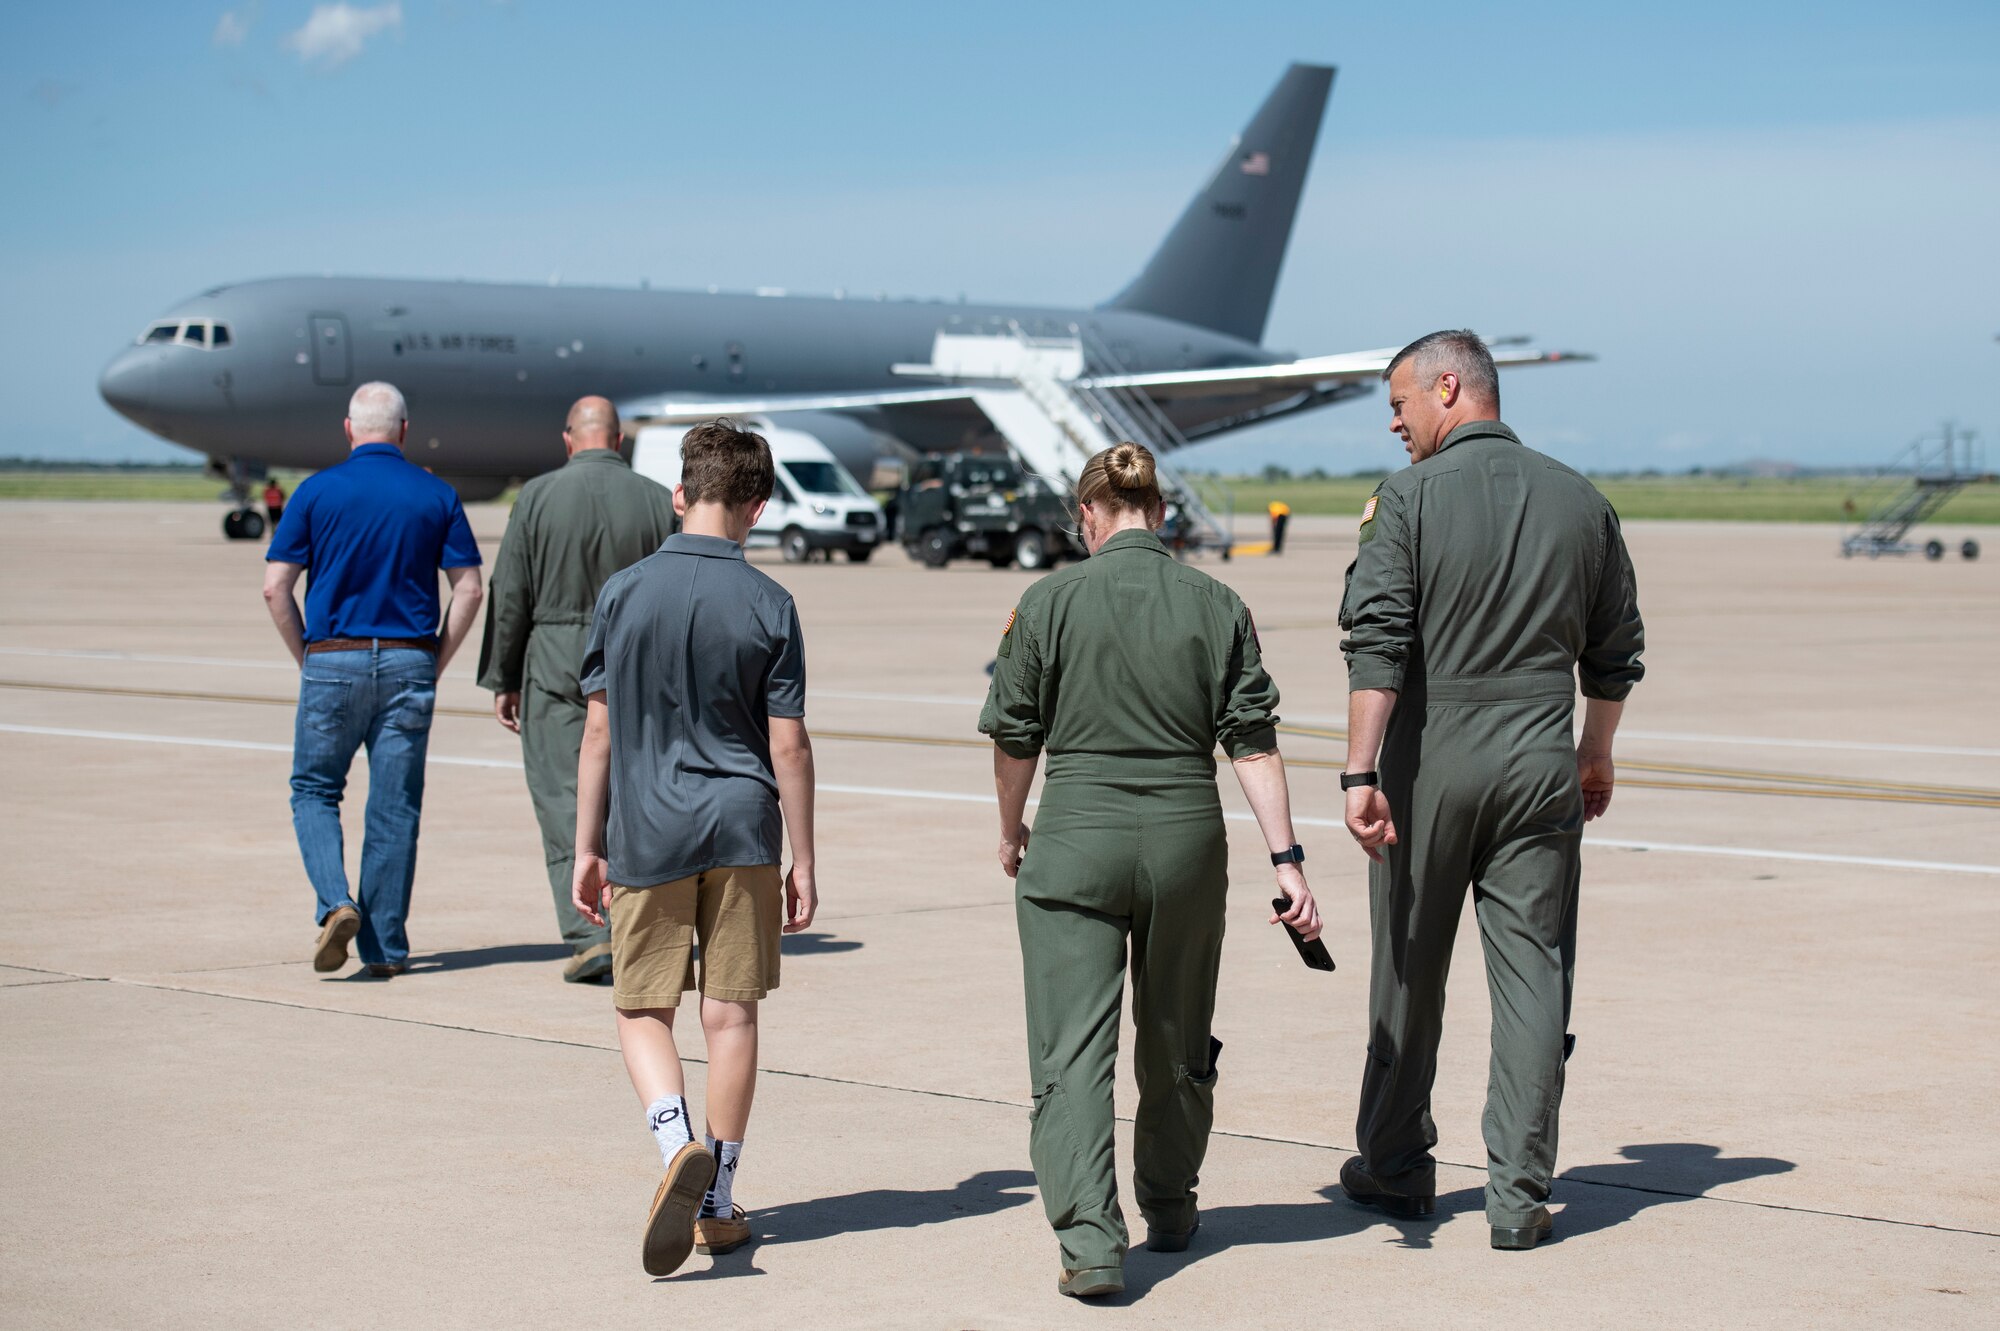 Airmen from the 97th Air Mobility Wing walk towards the newly arrived KC-46 Pegasus, May 18, 2019, at Altus Air Force Base, Okla. This plane was the second of two KC-46s to arrive at Altus AFB and marks the fifth KC-46 for the base. (U.S. Air Force photo by Airman 1st Class Breanna Klemm)